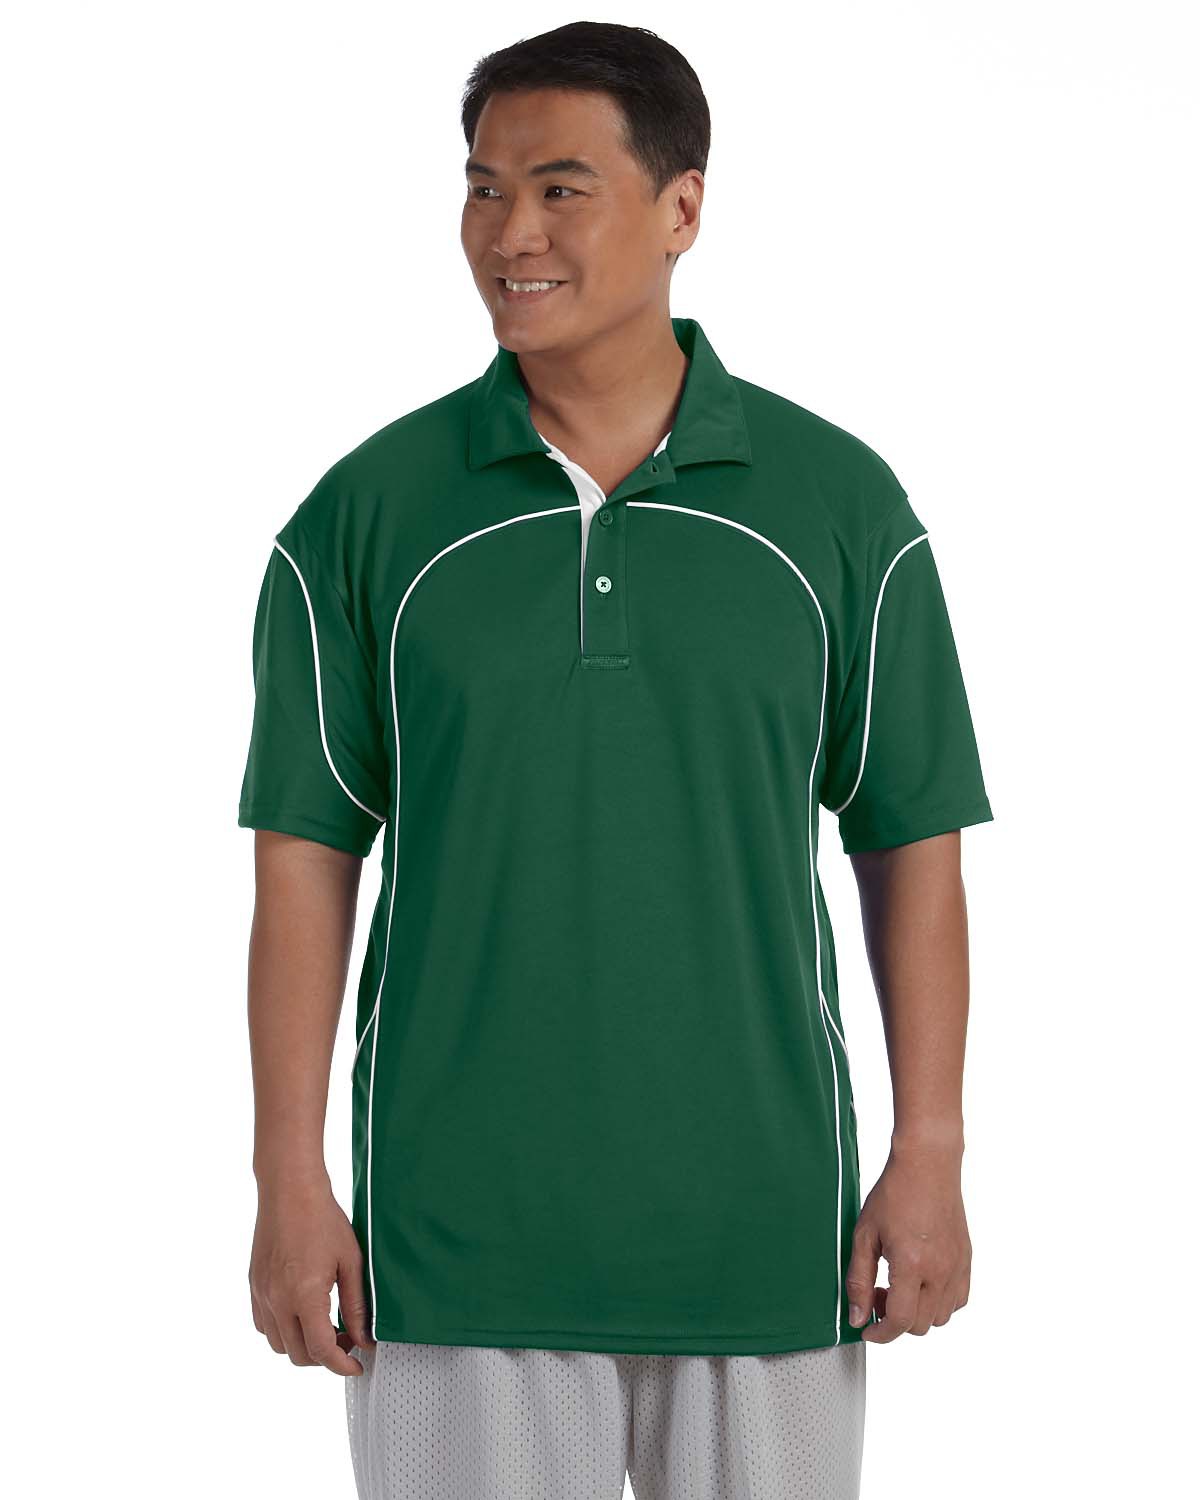 Russell Athletic 434CFM - Team Prestige Polo